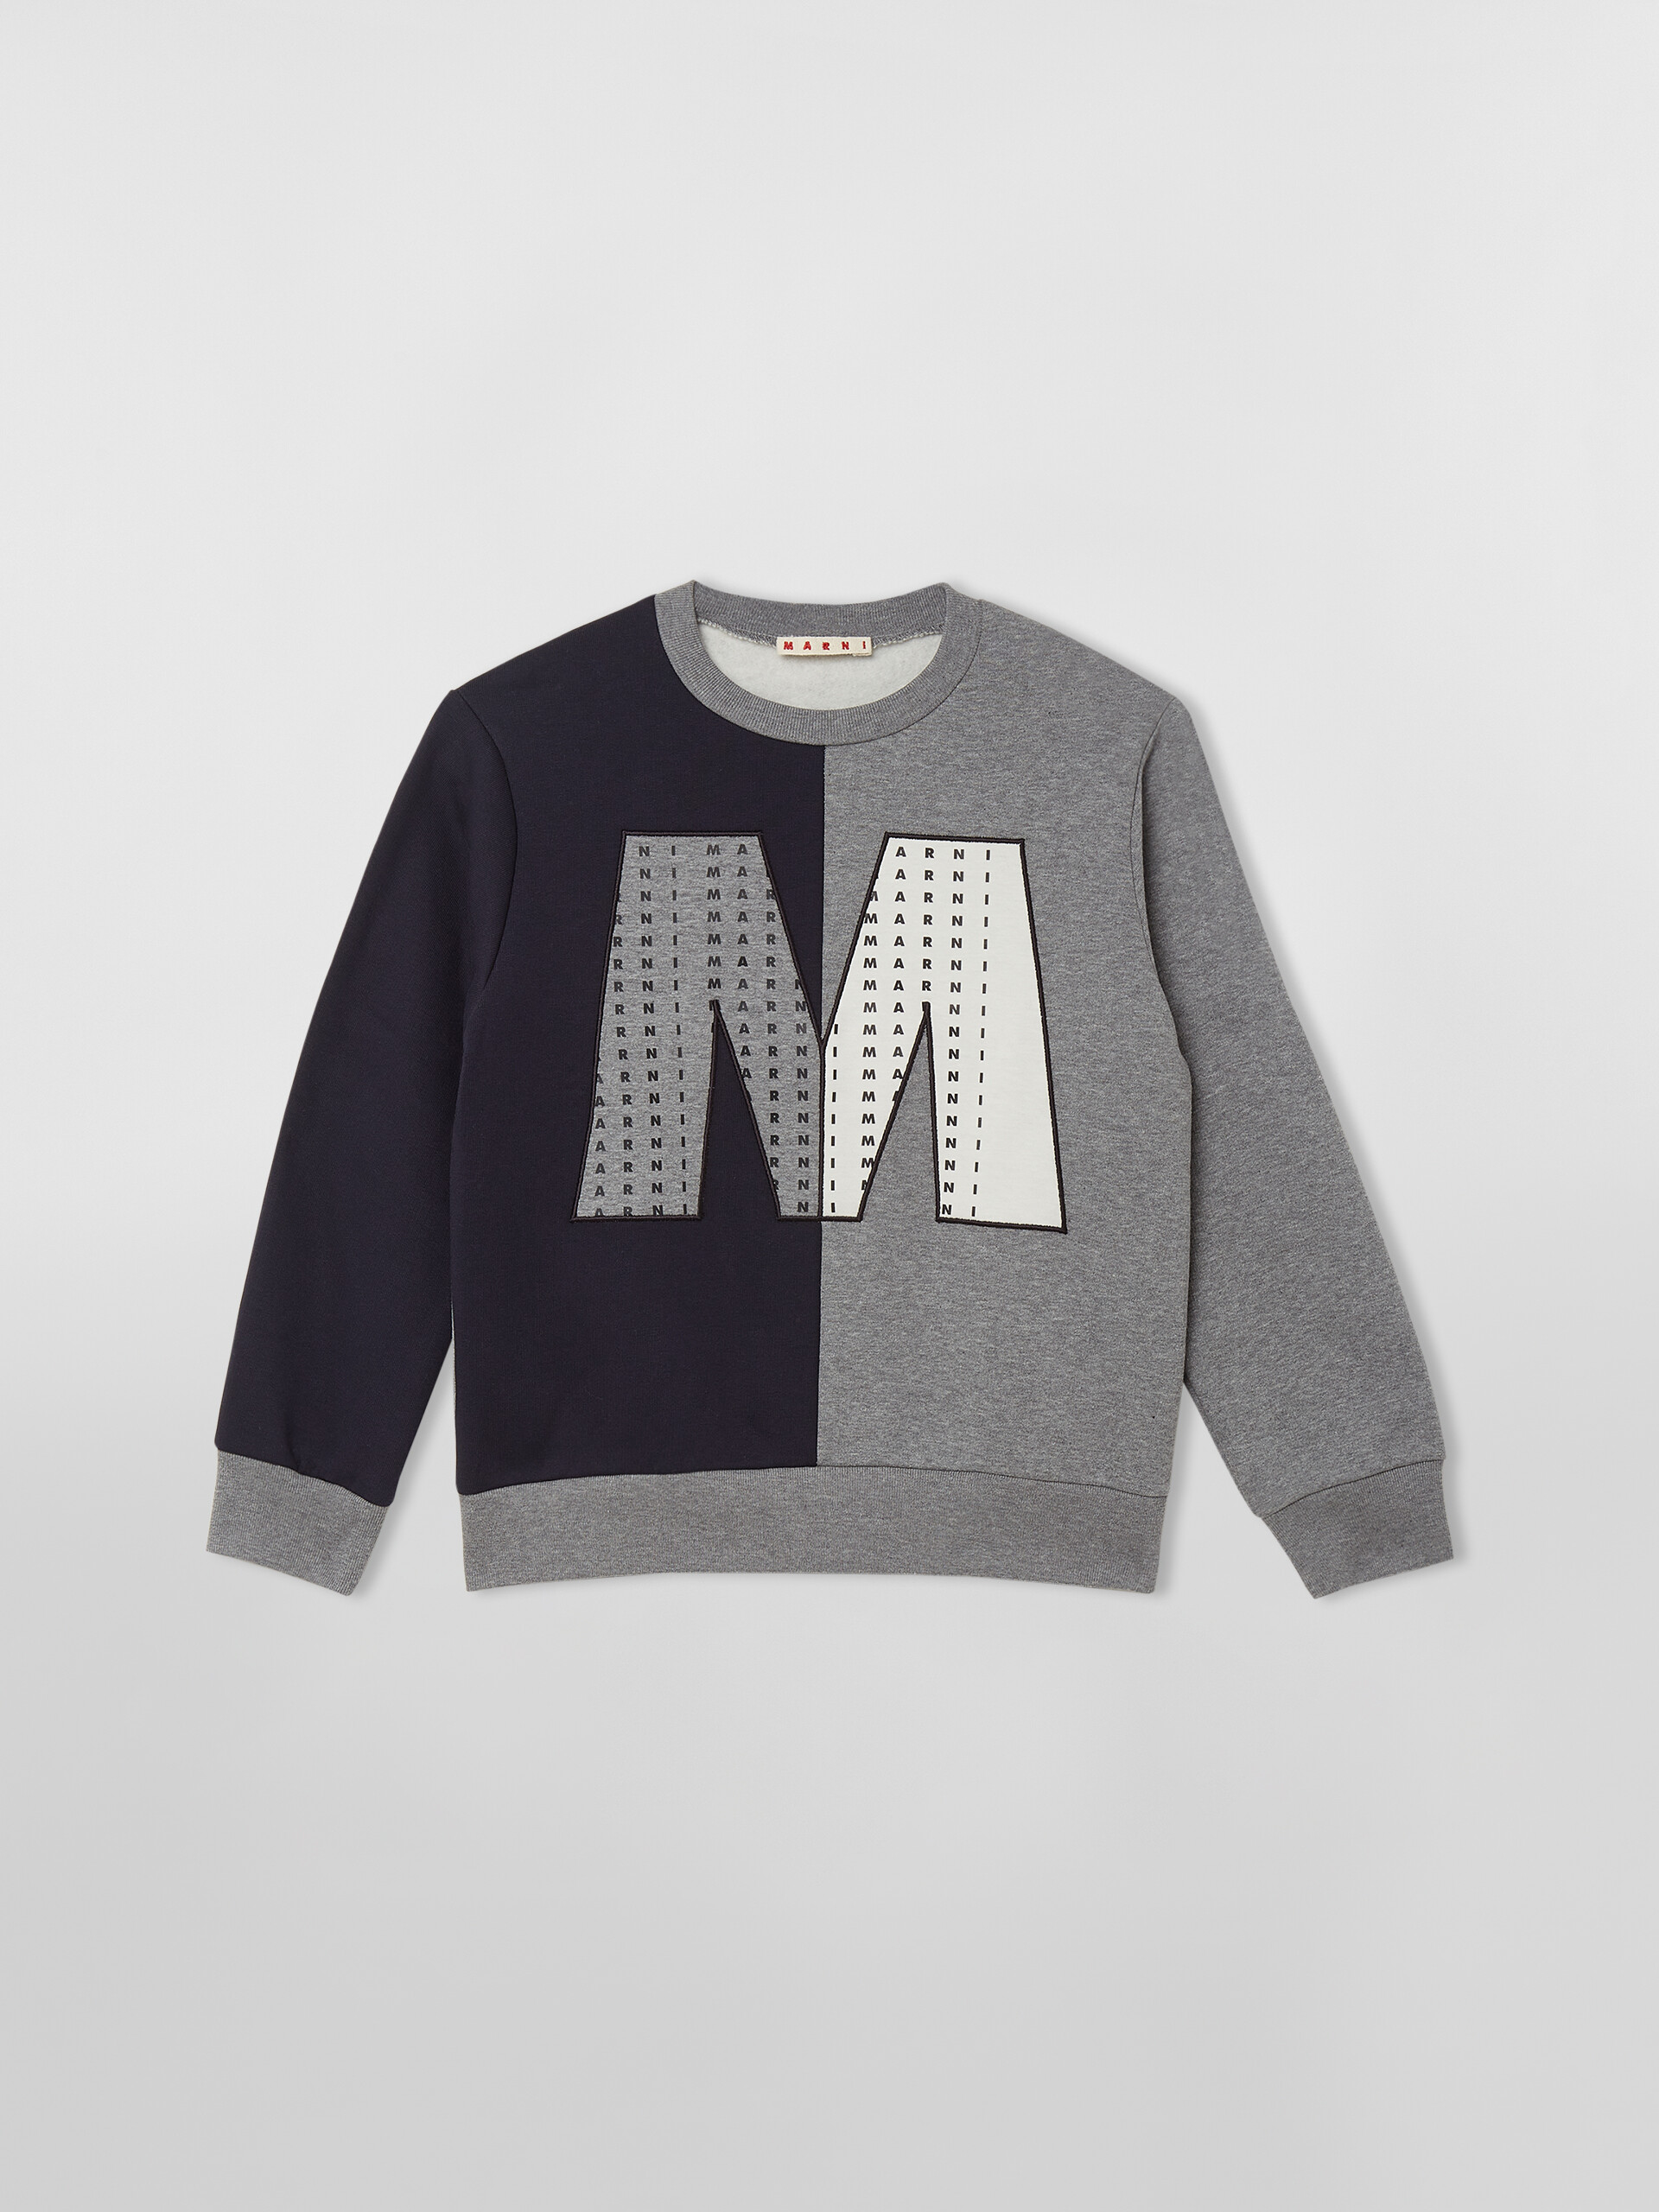 BICOLOR SWEATSHIRT WITH BIG "M" ON THE FRONT - Sweaters - Image 1